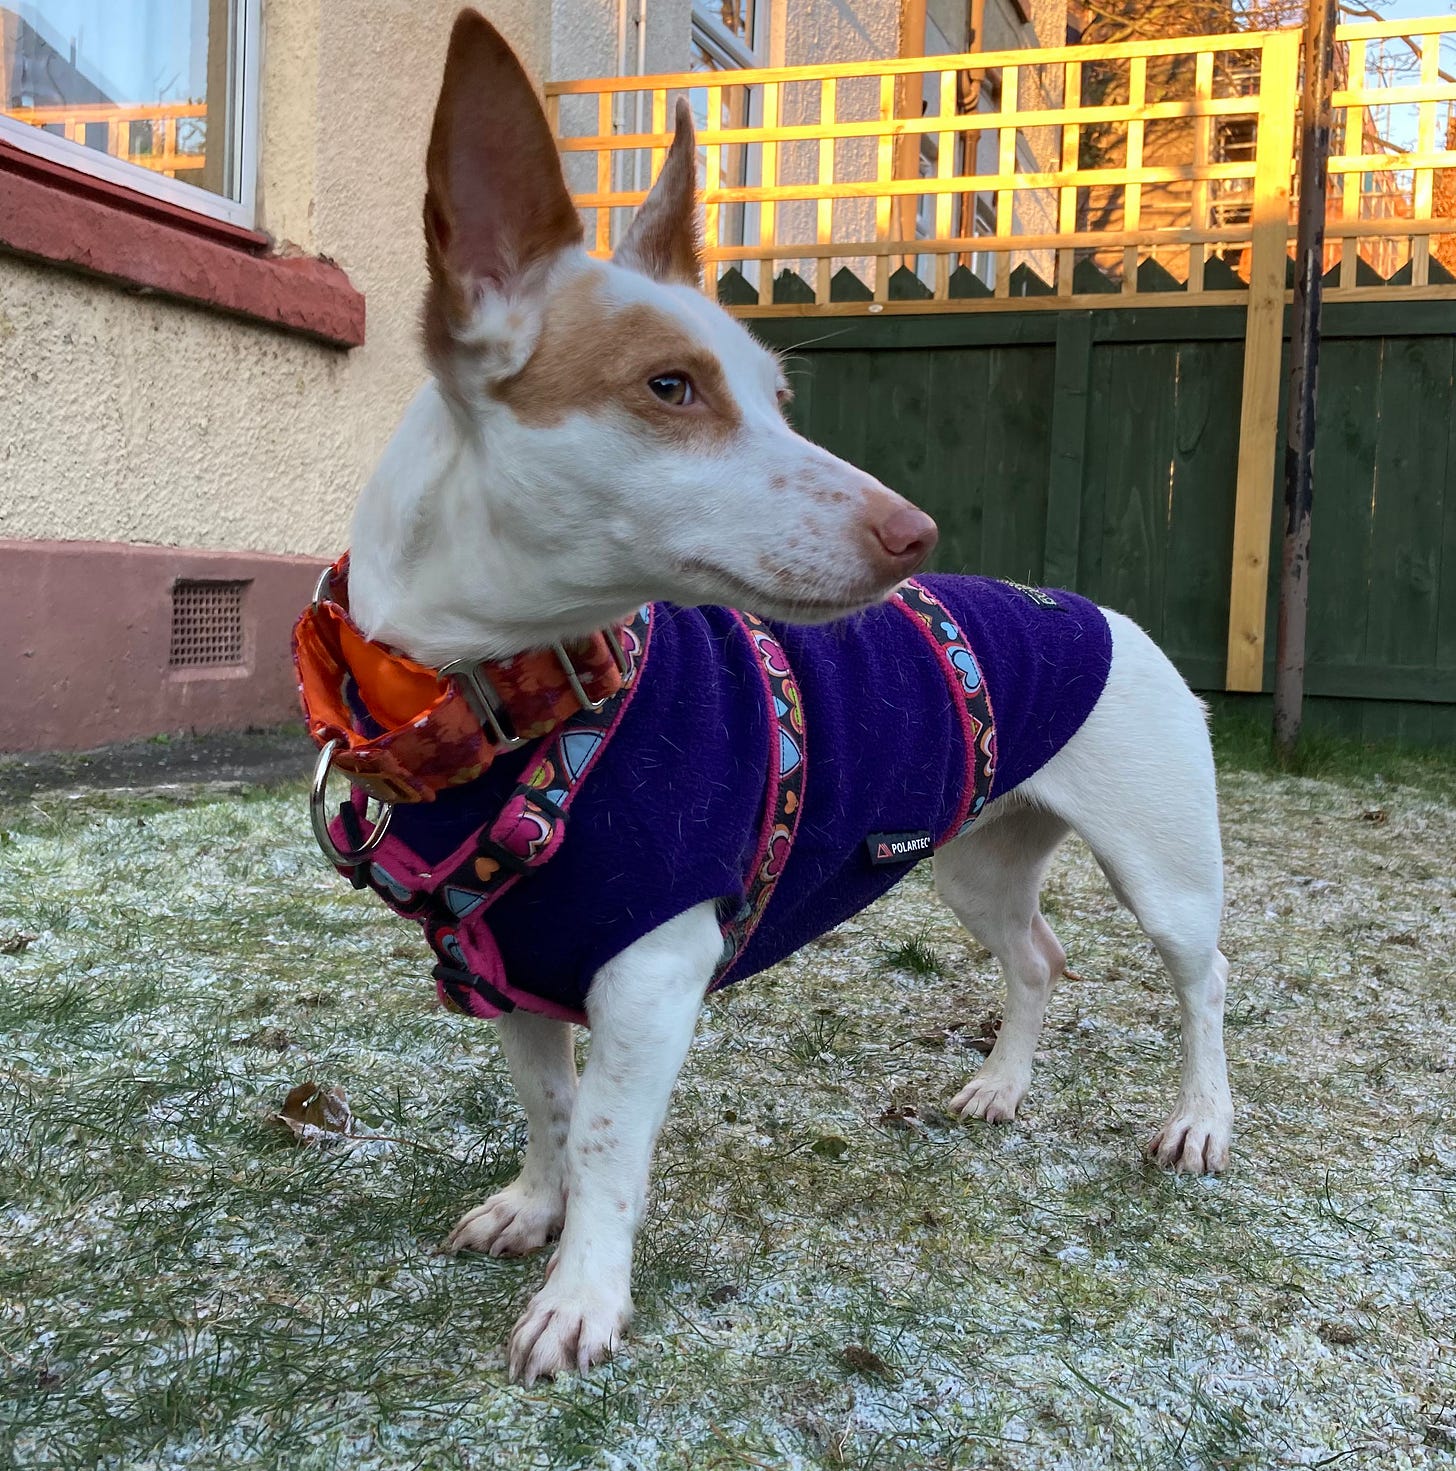 A little pupper. A doggo. A small white podenco with stumpy wee legs, brown patches on ears and eyes. She stands in a frosty garden in the low winter light.